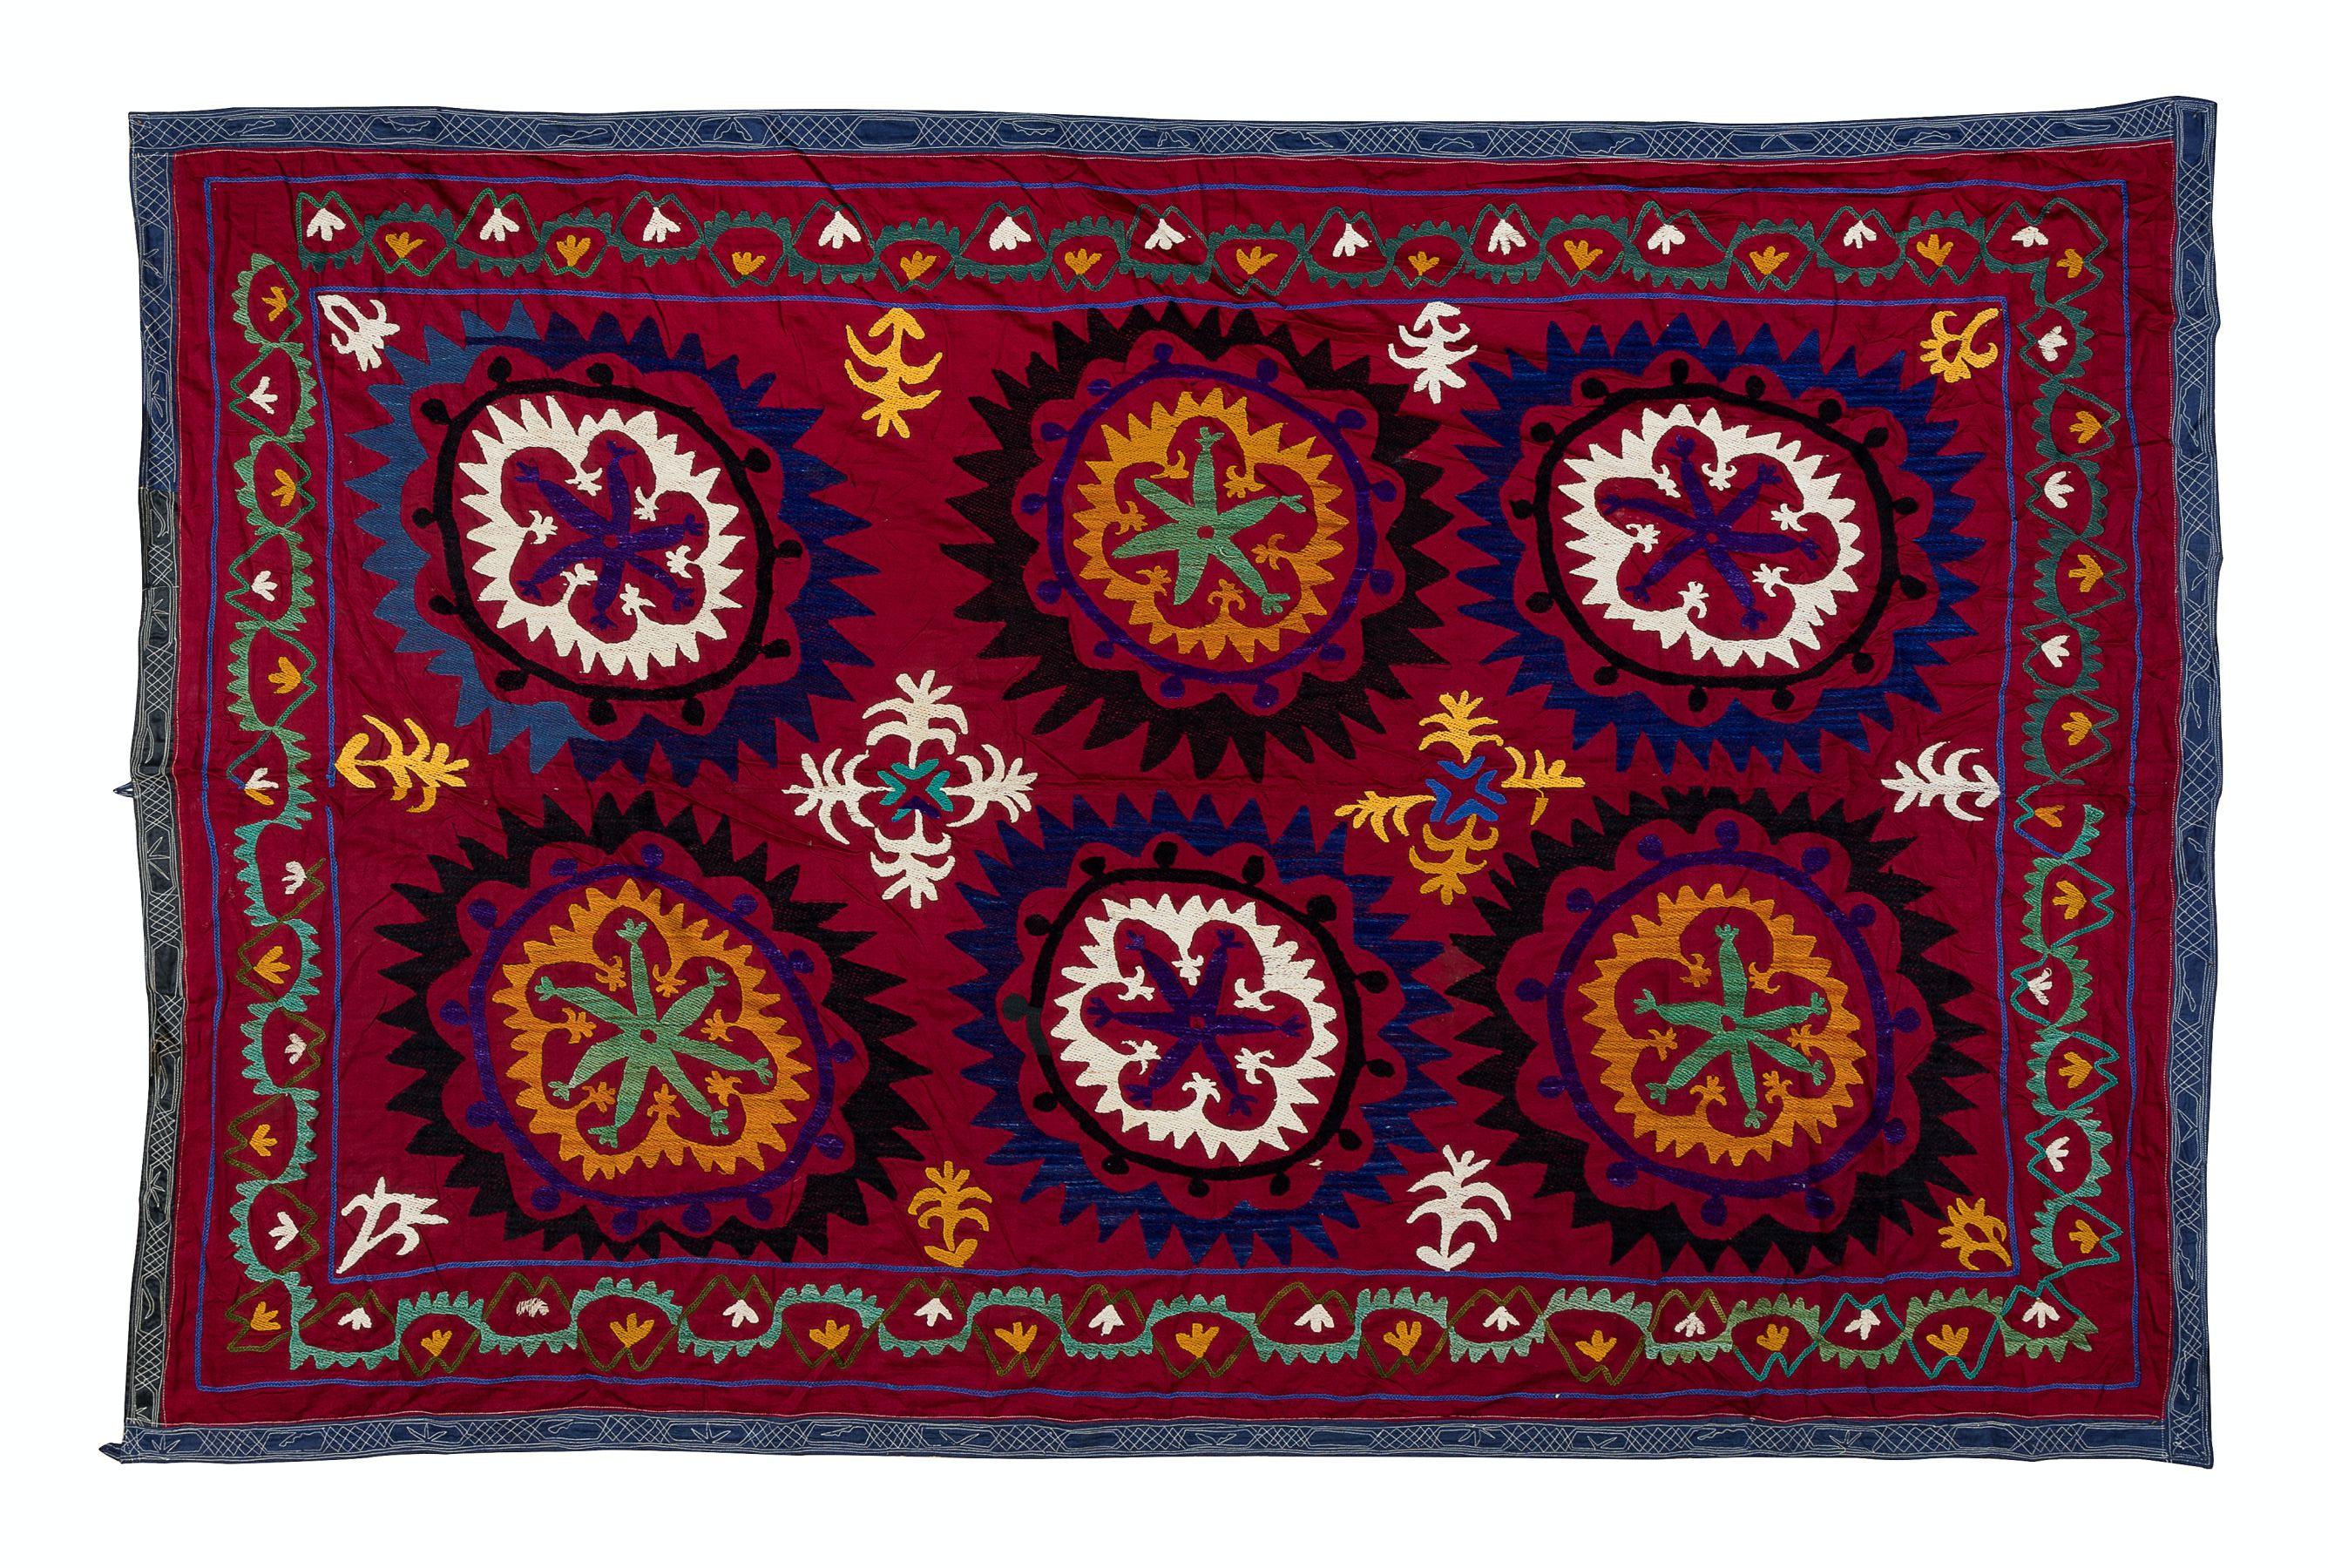 20th Century 4.8x7 Ft Authentic Silk Hand Embroidery Wall Hanging, Uzbek Suzani Textile Throw For Sale